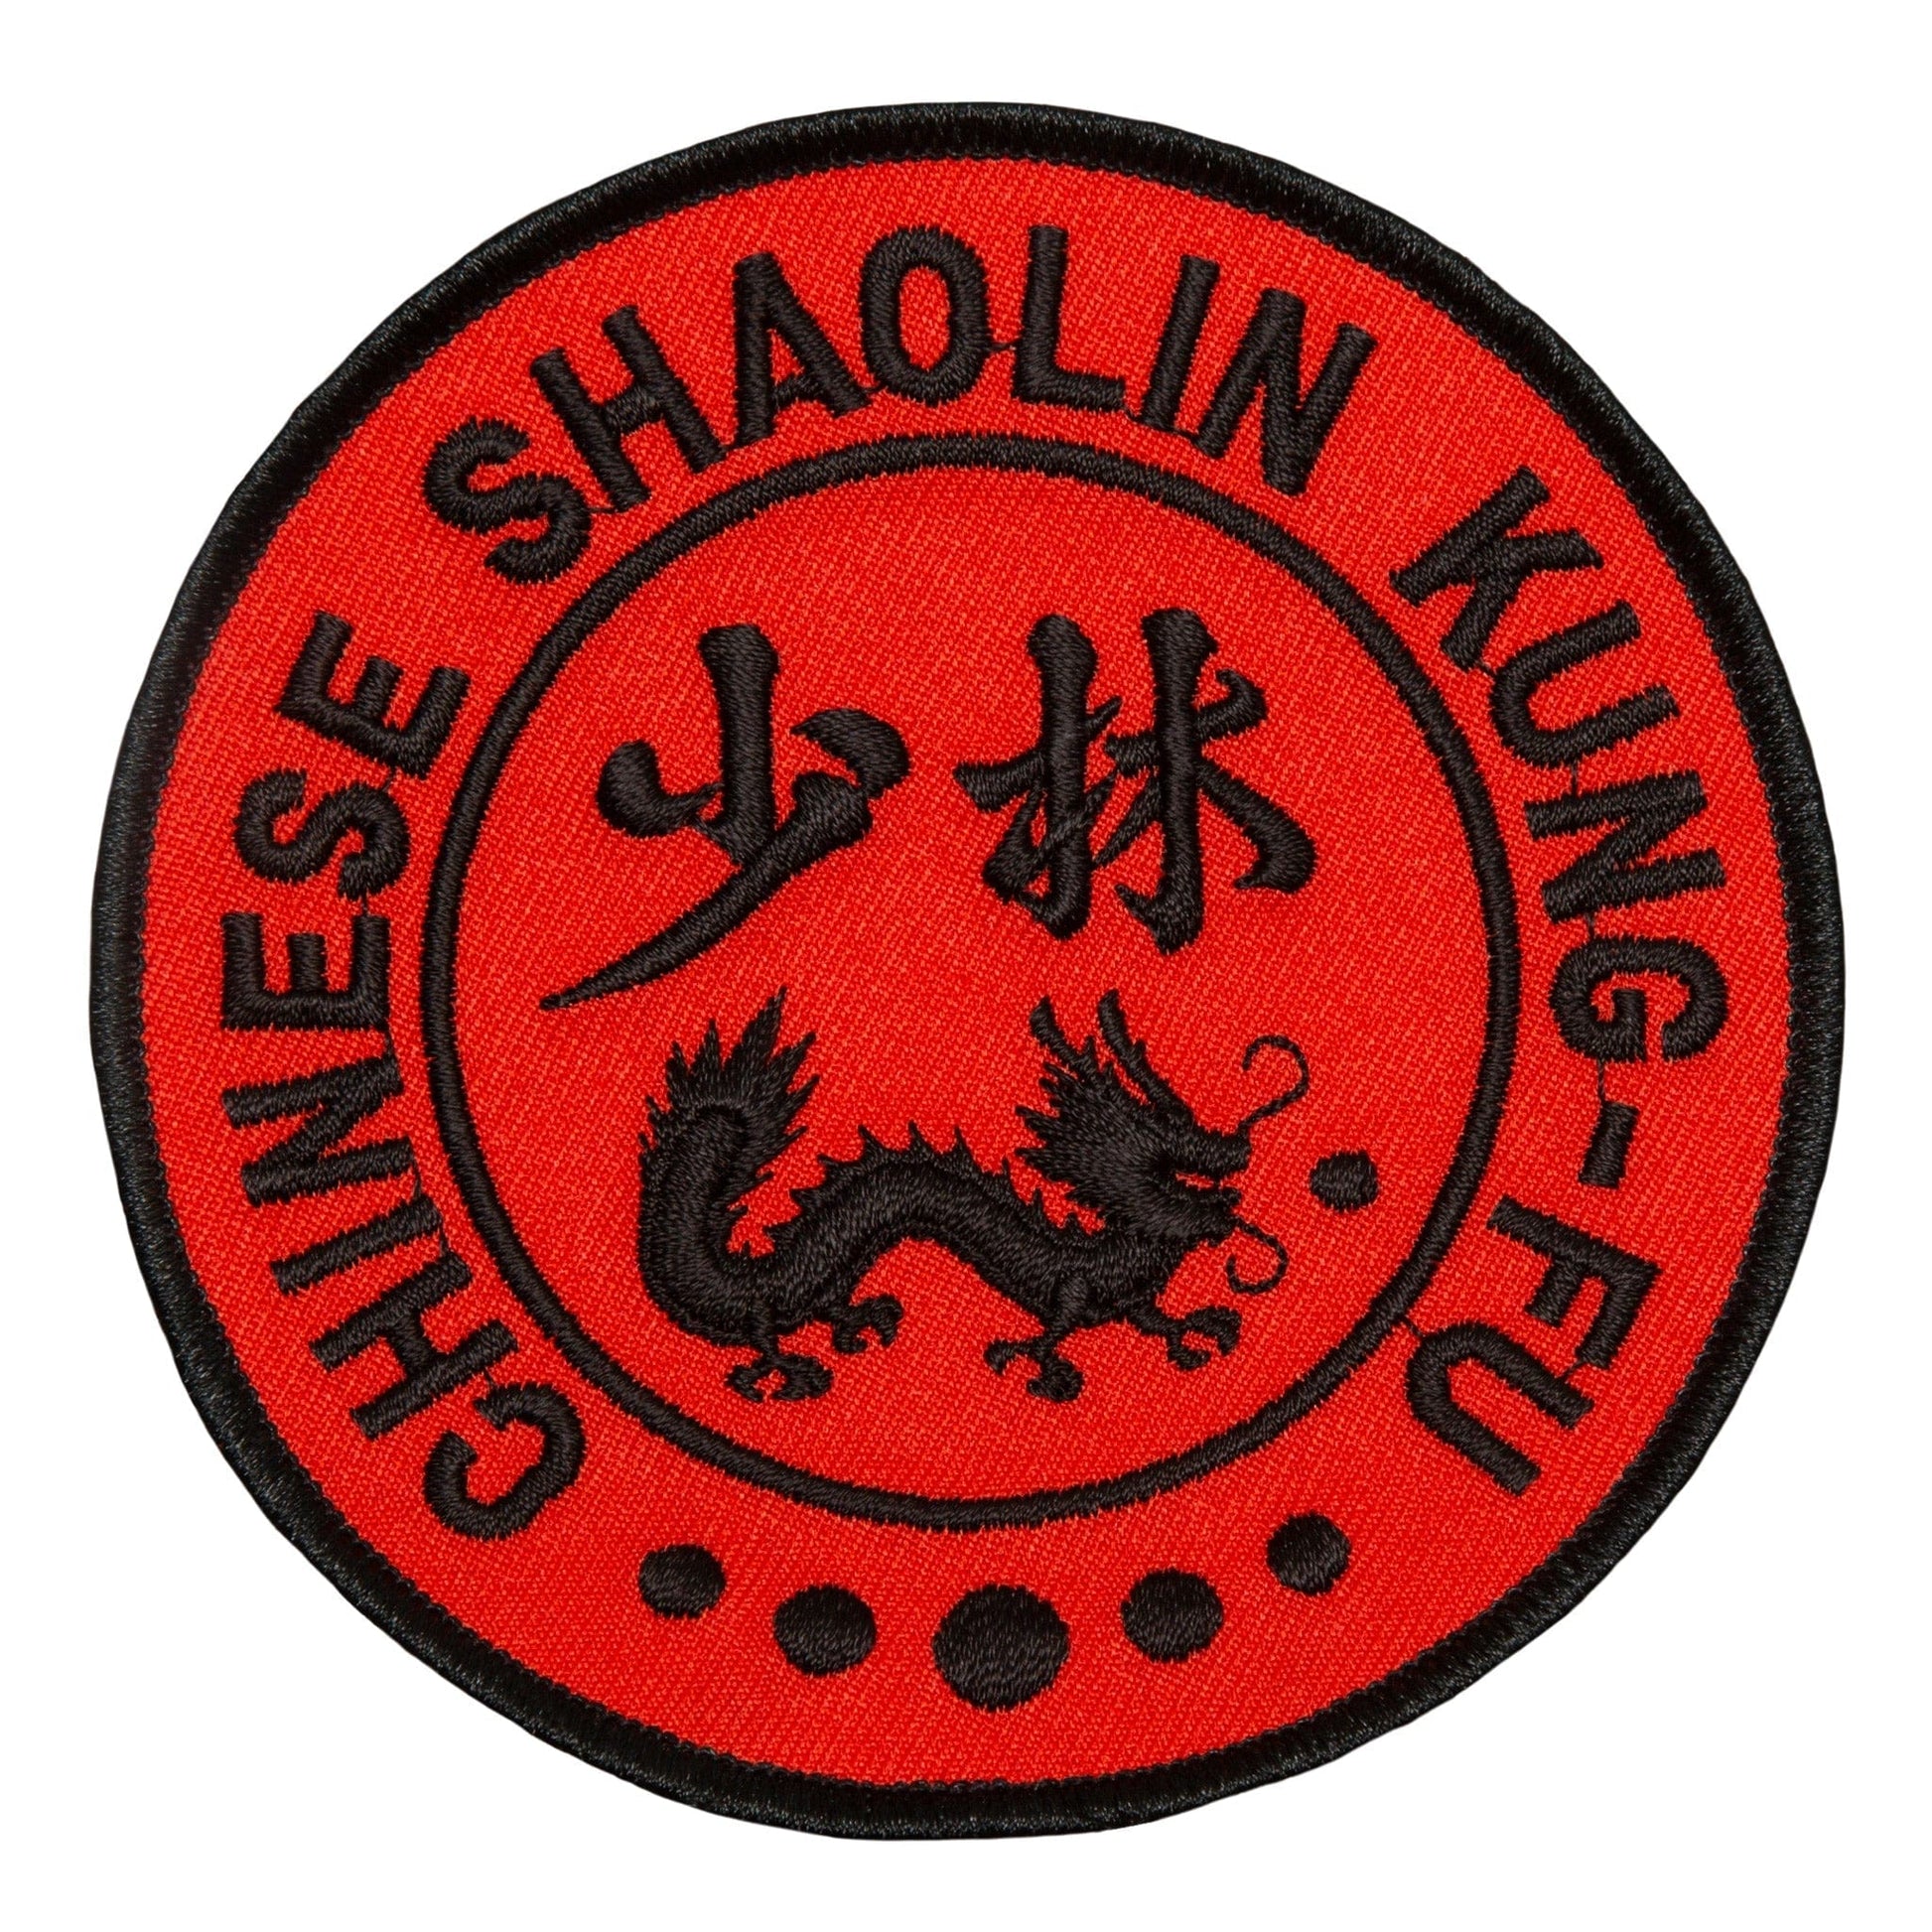 EclipseMartialArtsSupplies sporting goods Chinese Shaolin Patch Martial Arts Uniform Patch